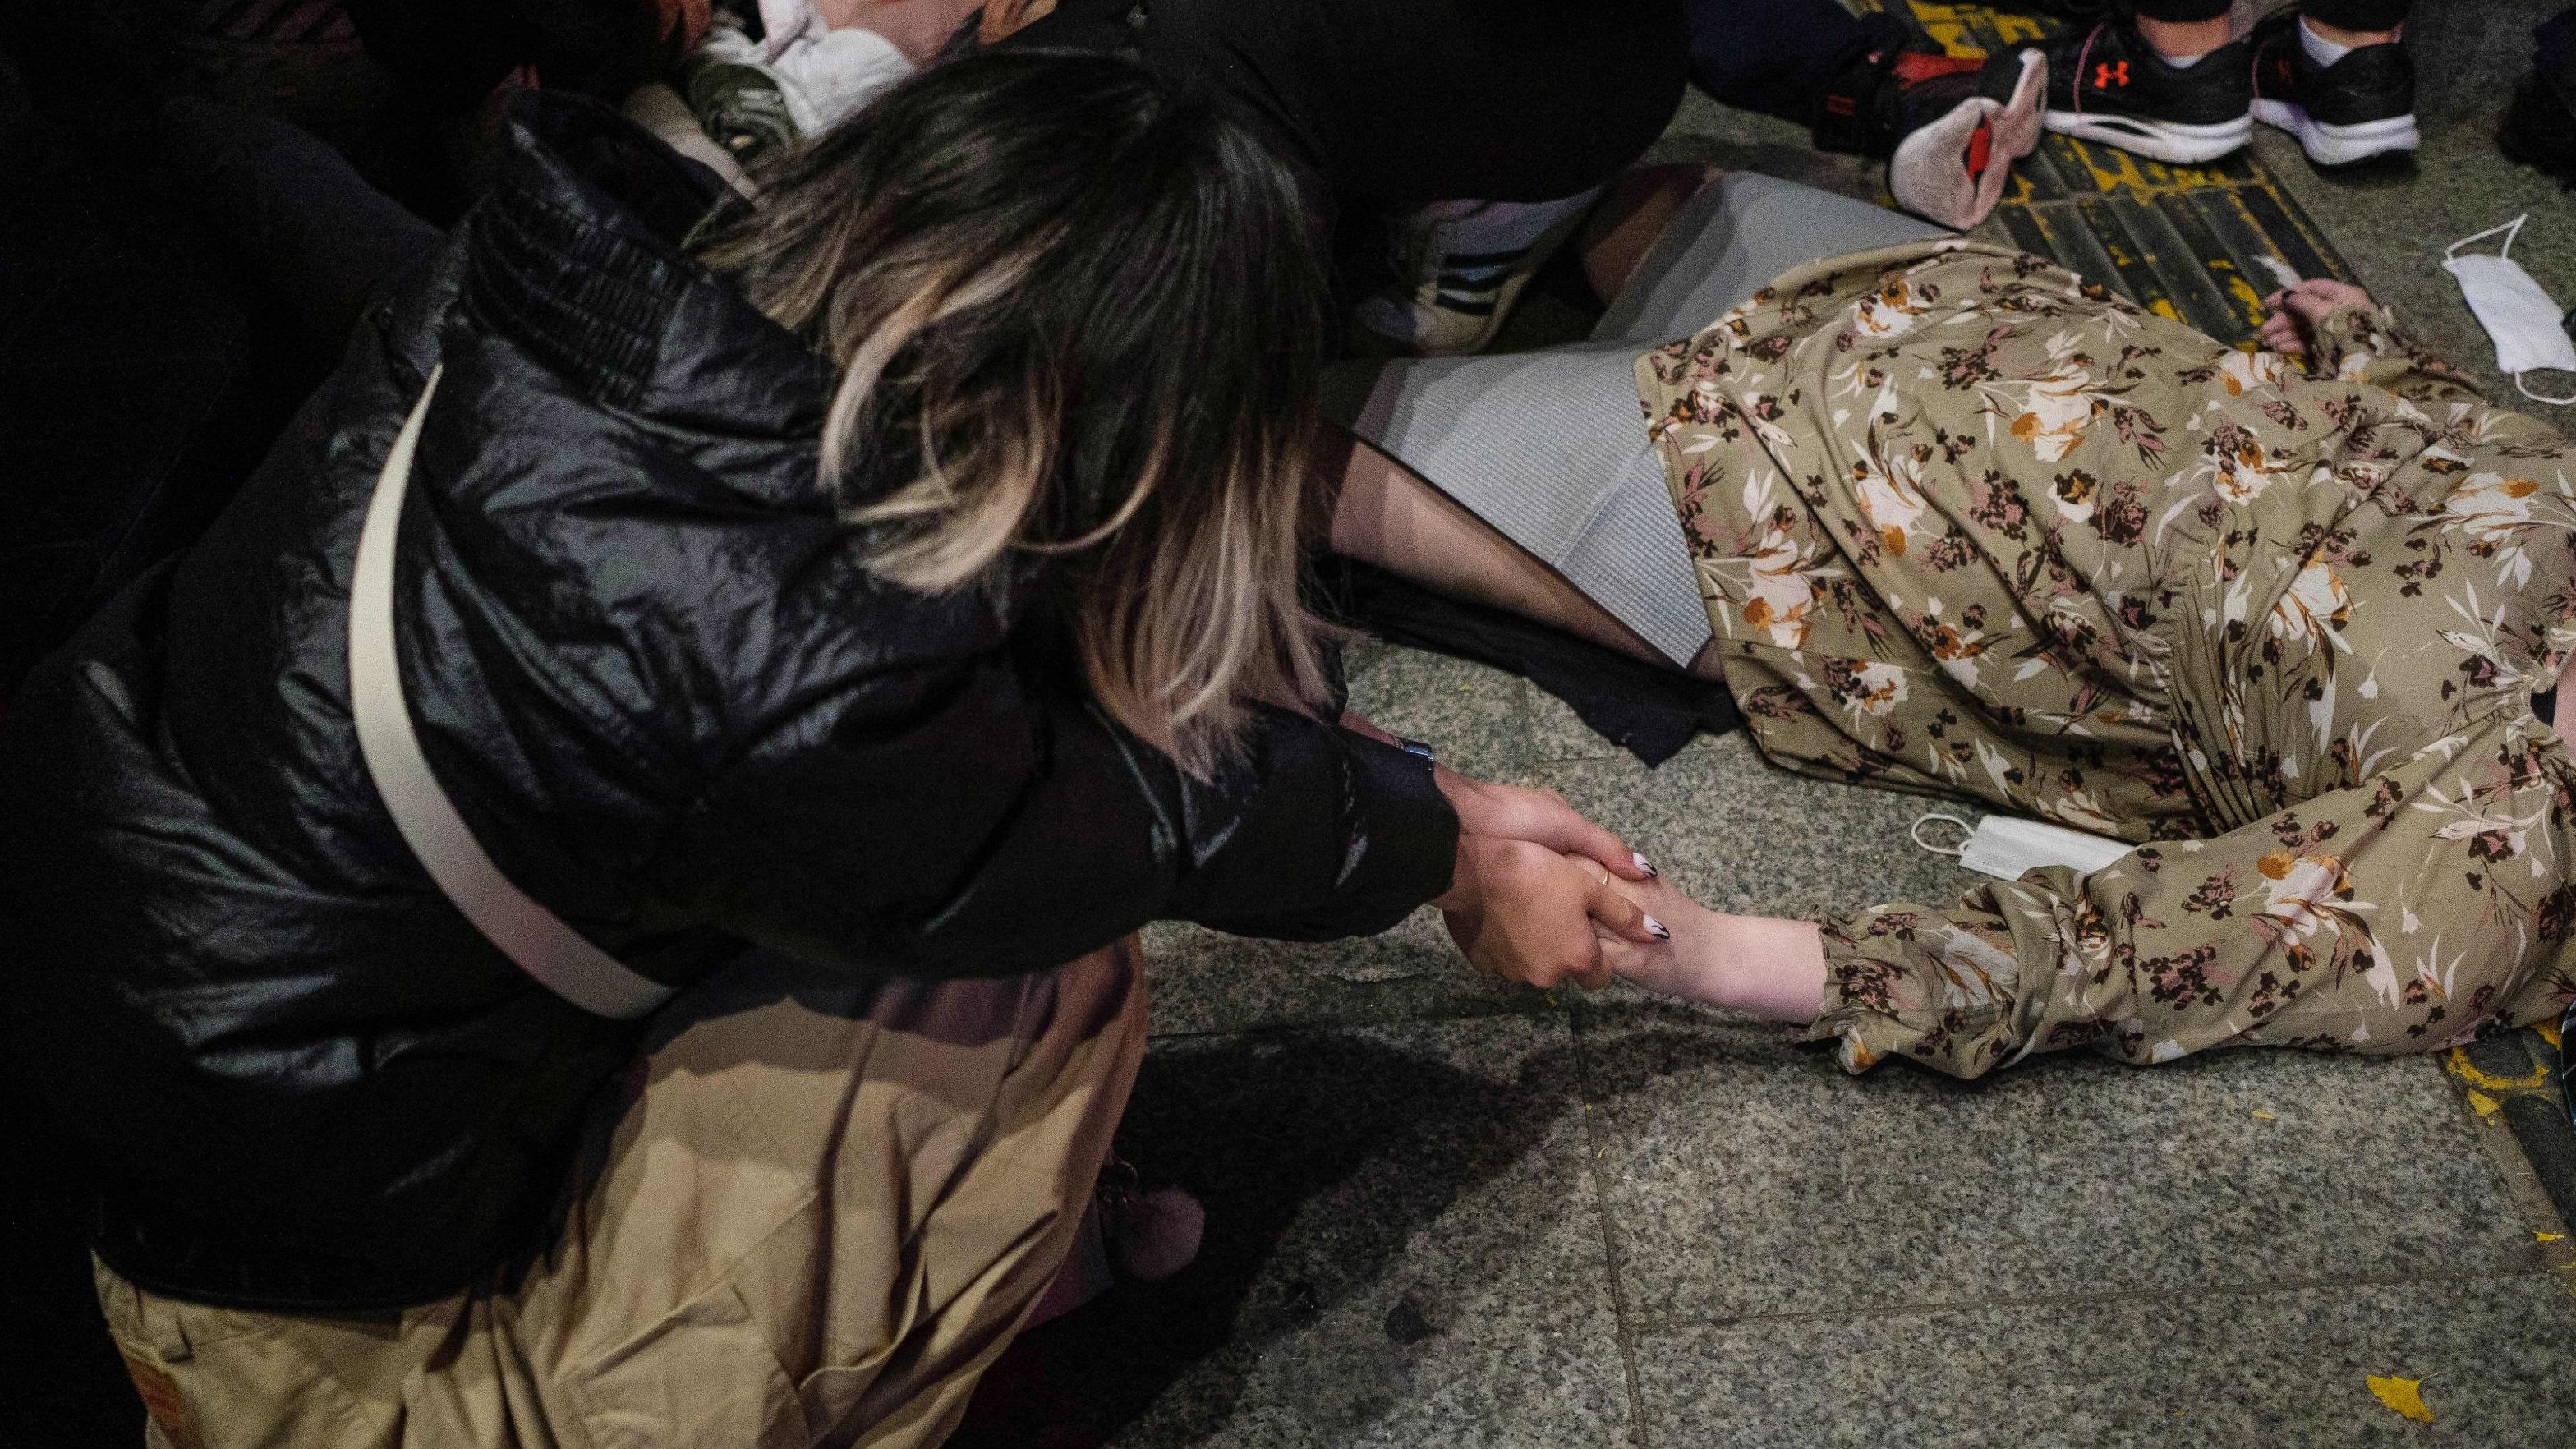 A woman holds the hand of a person who was caught in <a href="https://www.cnn.com/2022/10/30/world/gallery/seoul-crowd-surge-gallery" target="_blank">a crowd surge</a> in Seoul early Sunday, October 30.